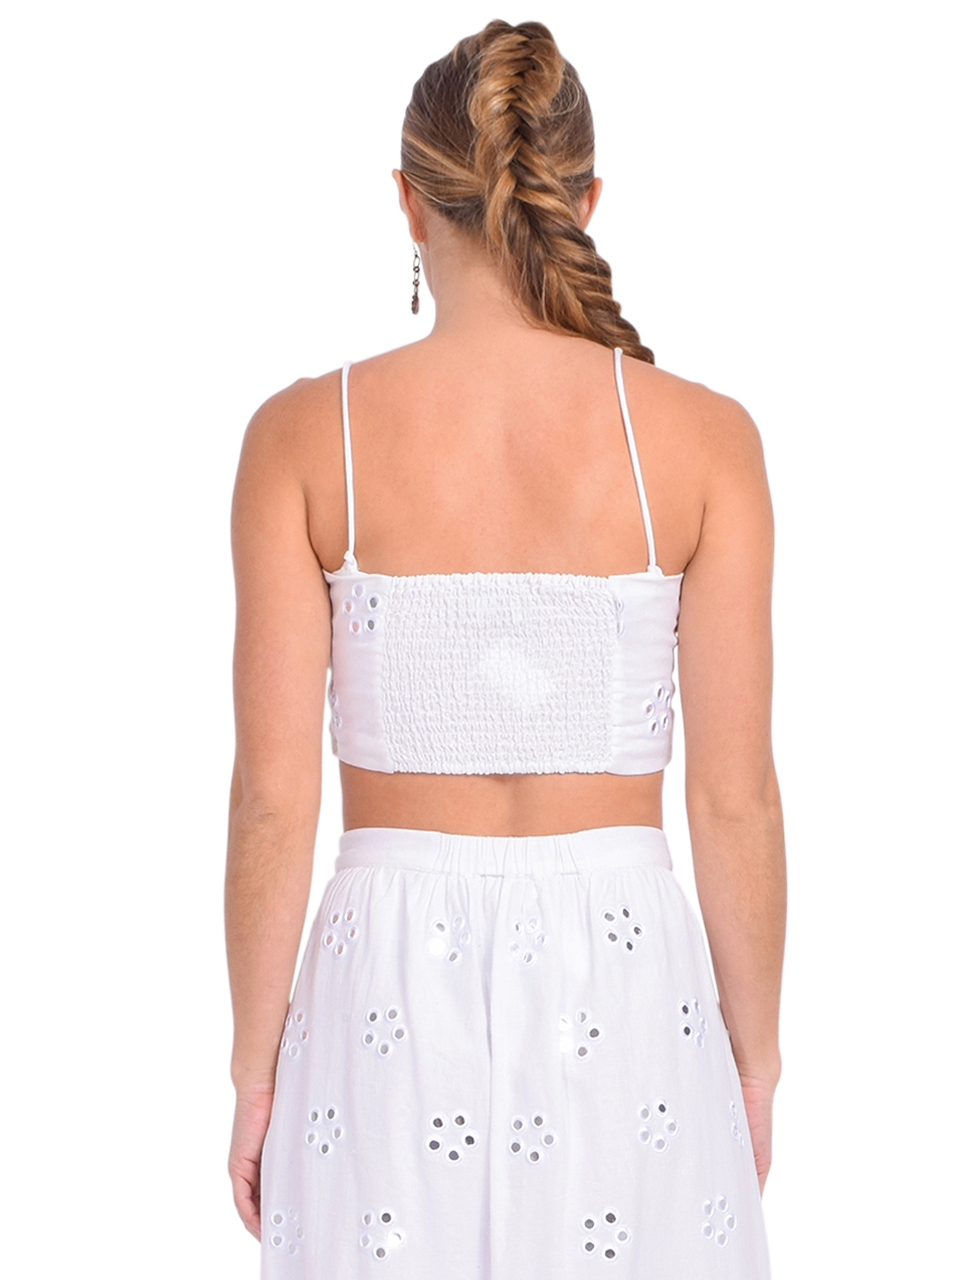 RHODE Dina Top in White Mirror Daisy Back View 